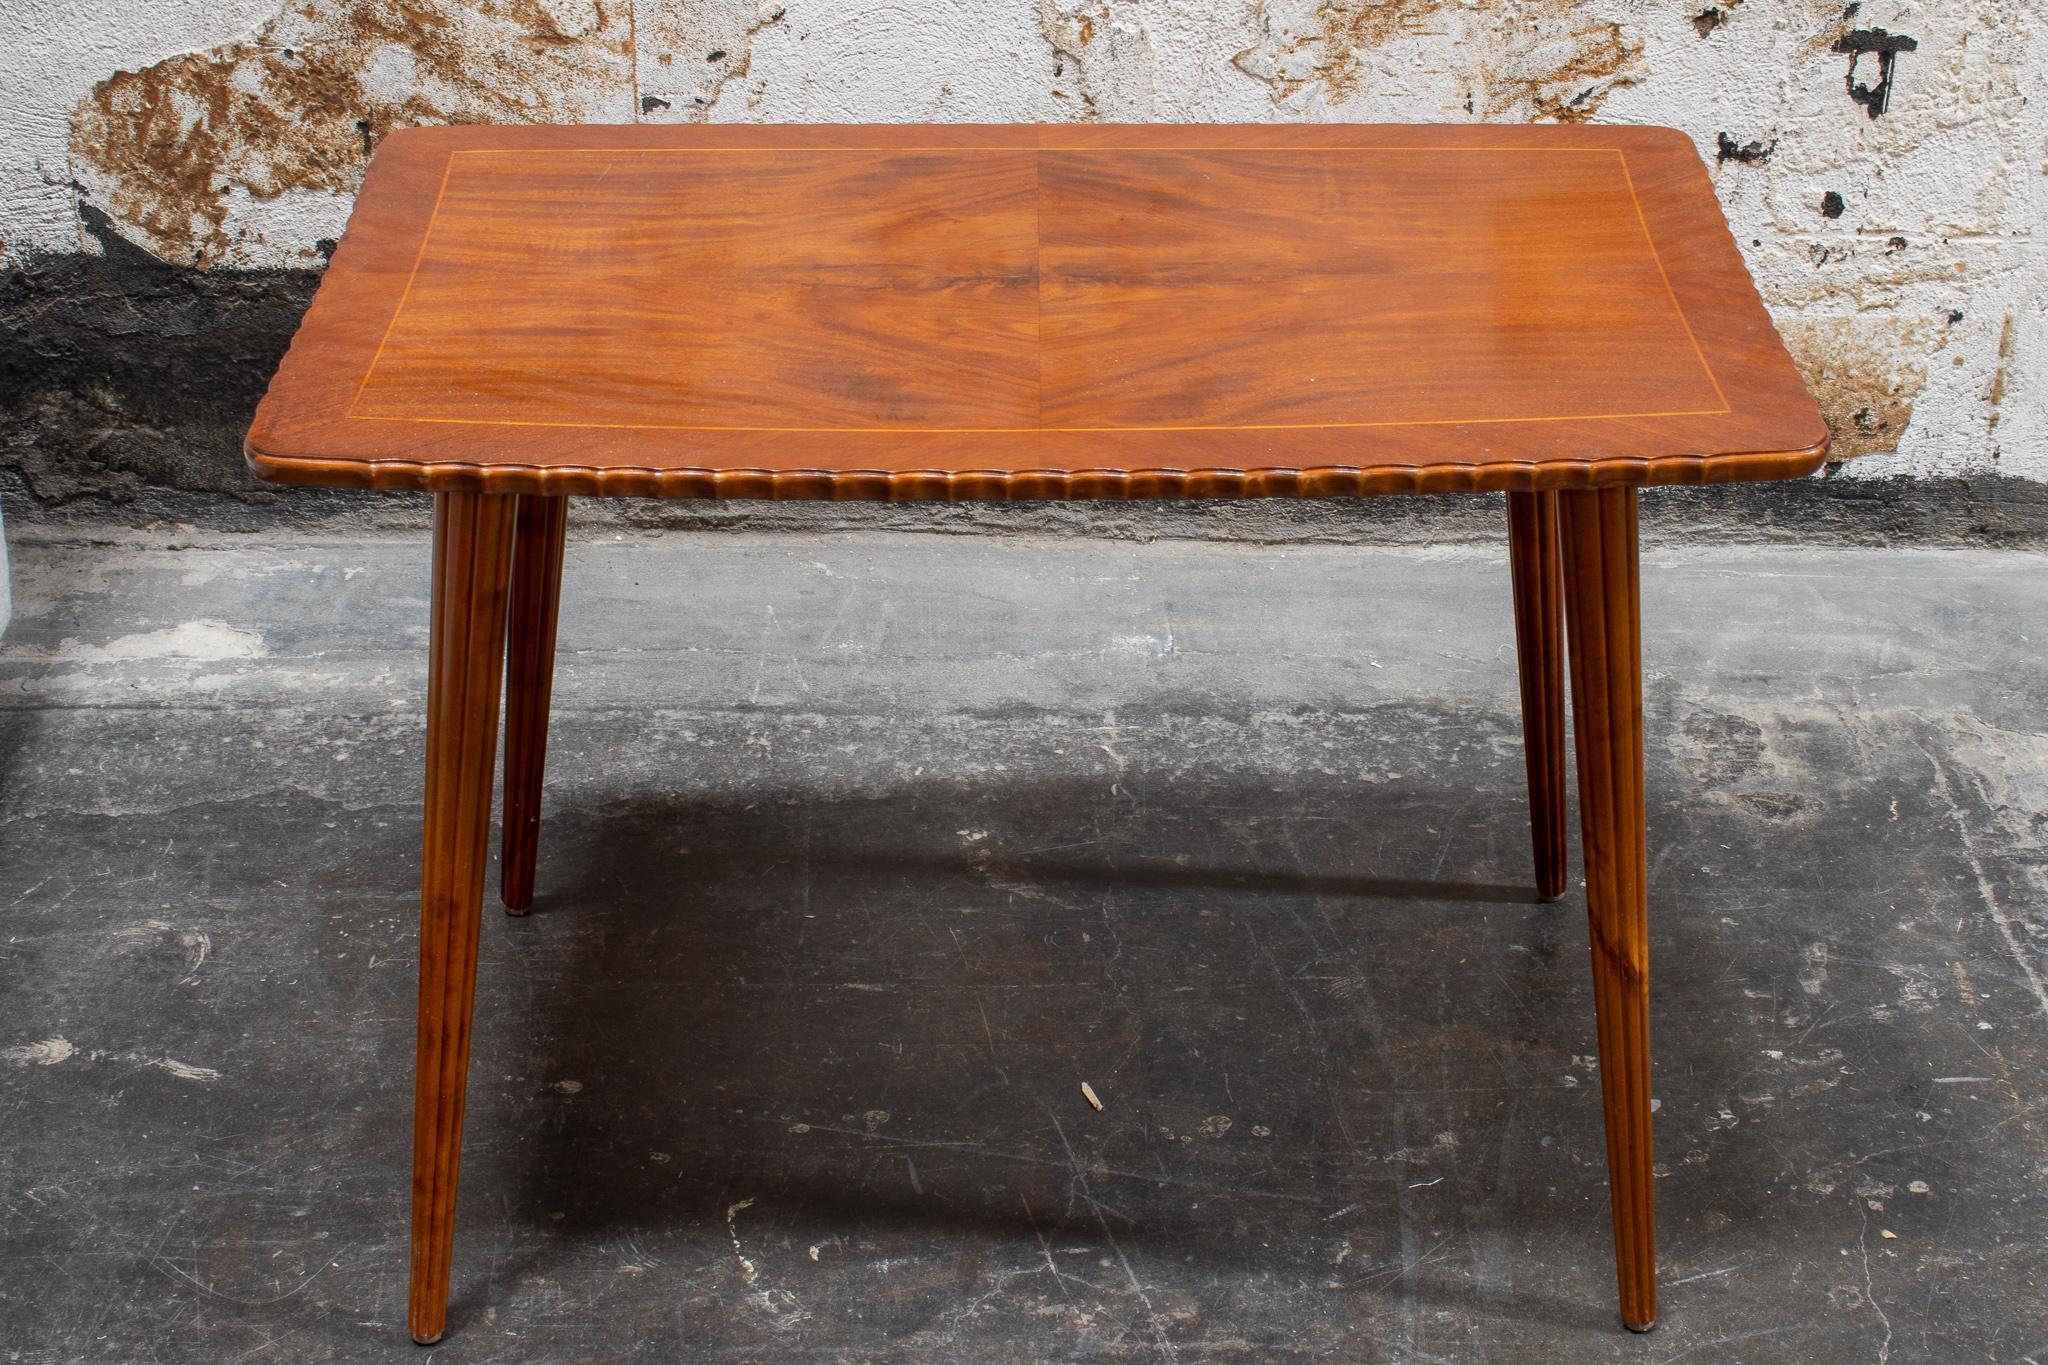 Scandinavian Modern Coffee Table with Fluted Edge in Crotch Mahogany, 1940's Sweden For Sale